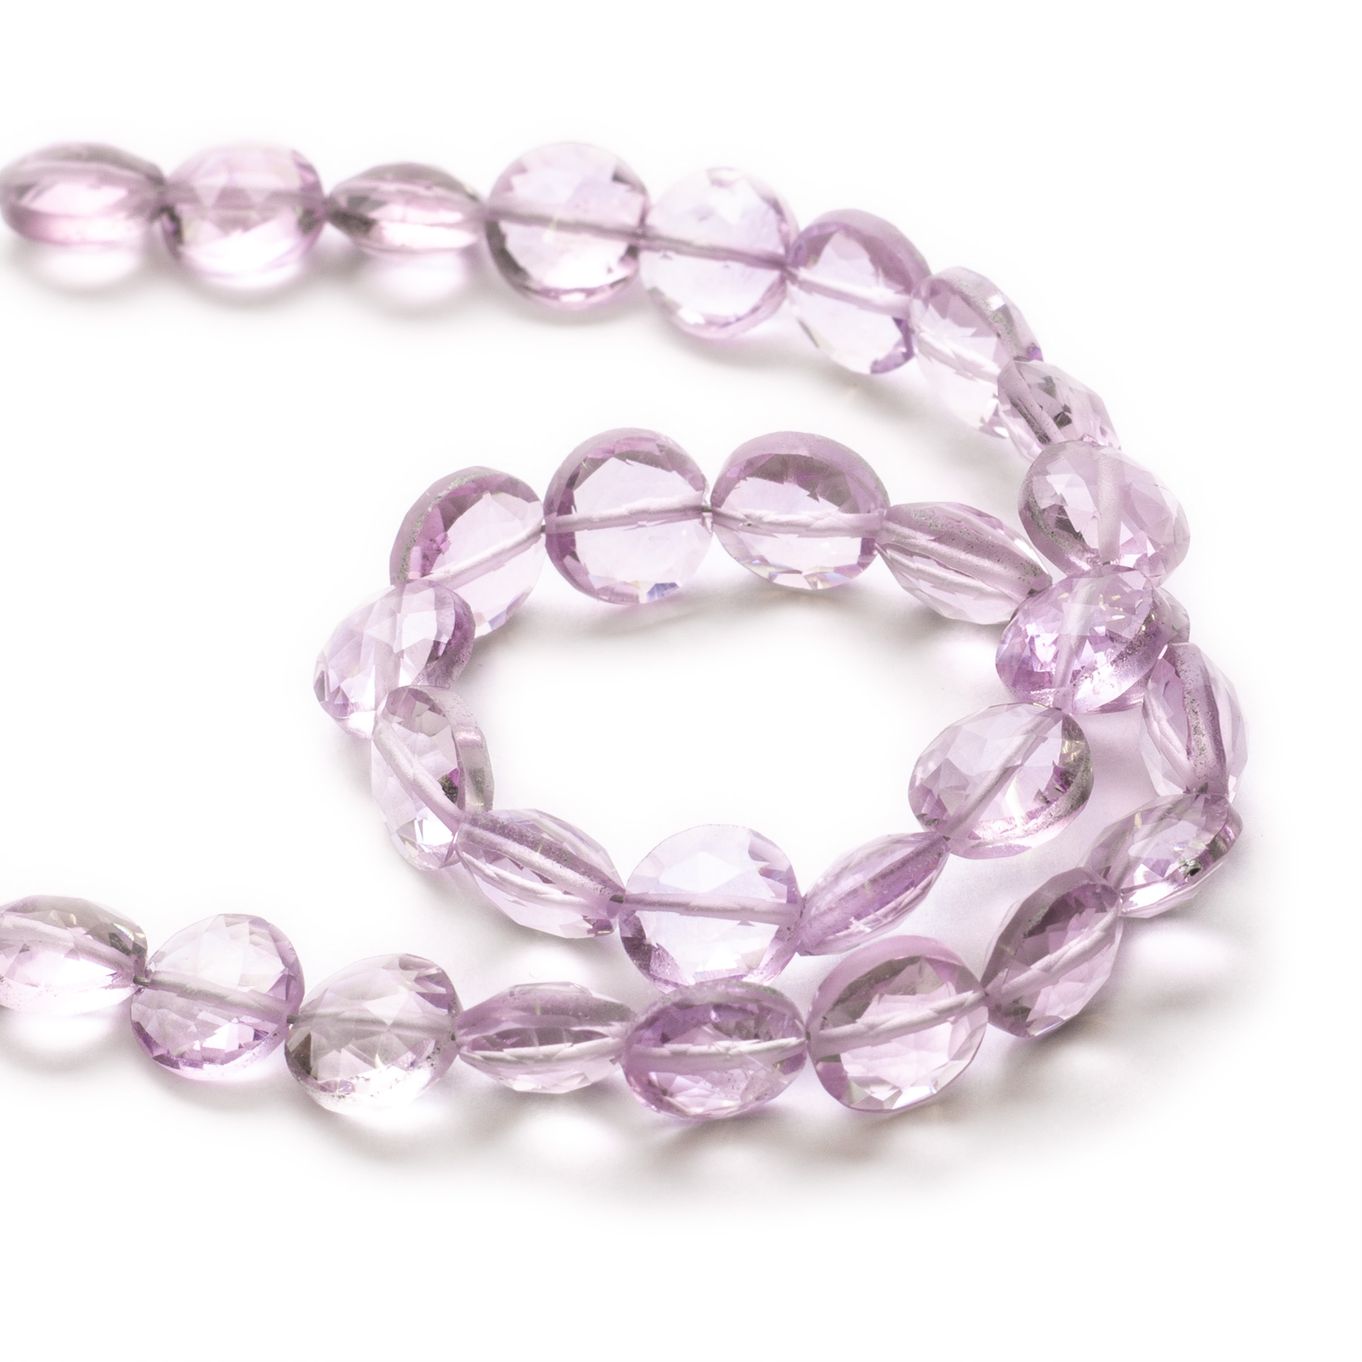 Pink Amethyst Faceted Coin Beads - Approx 7mm